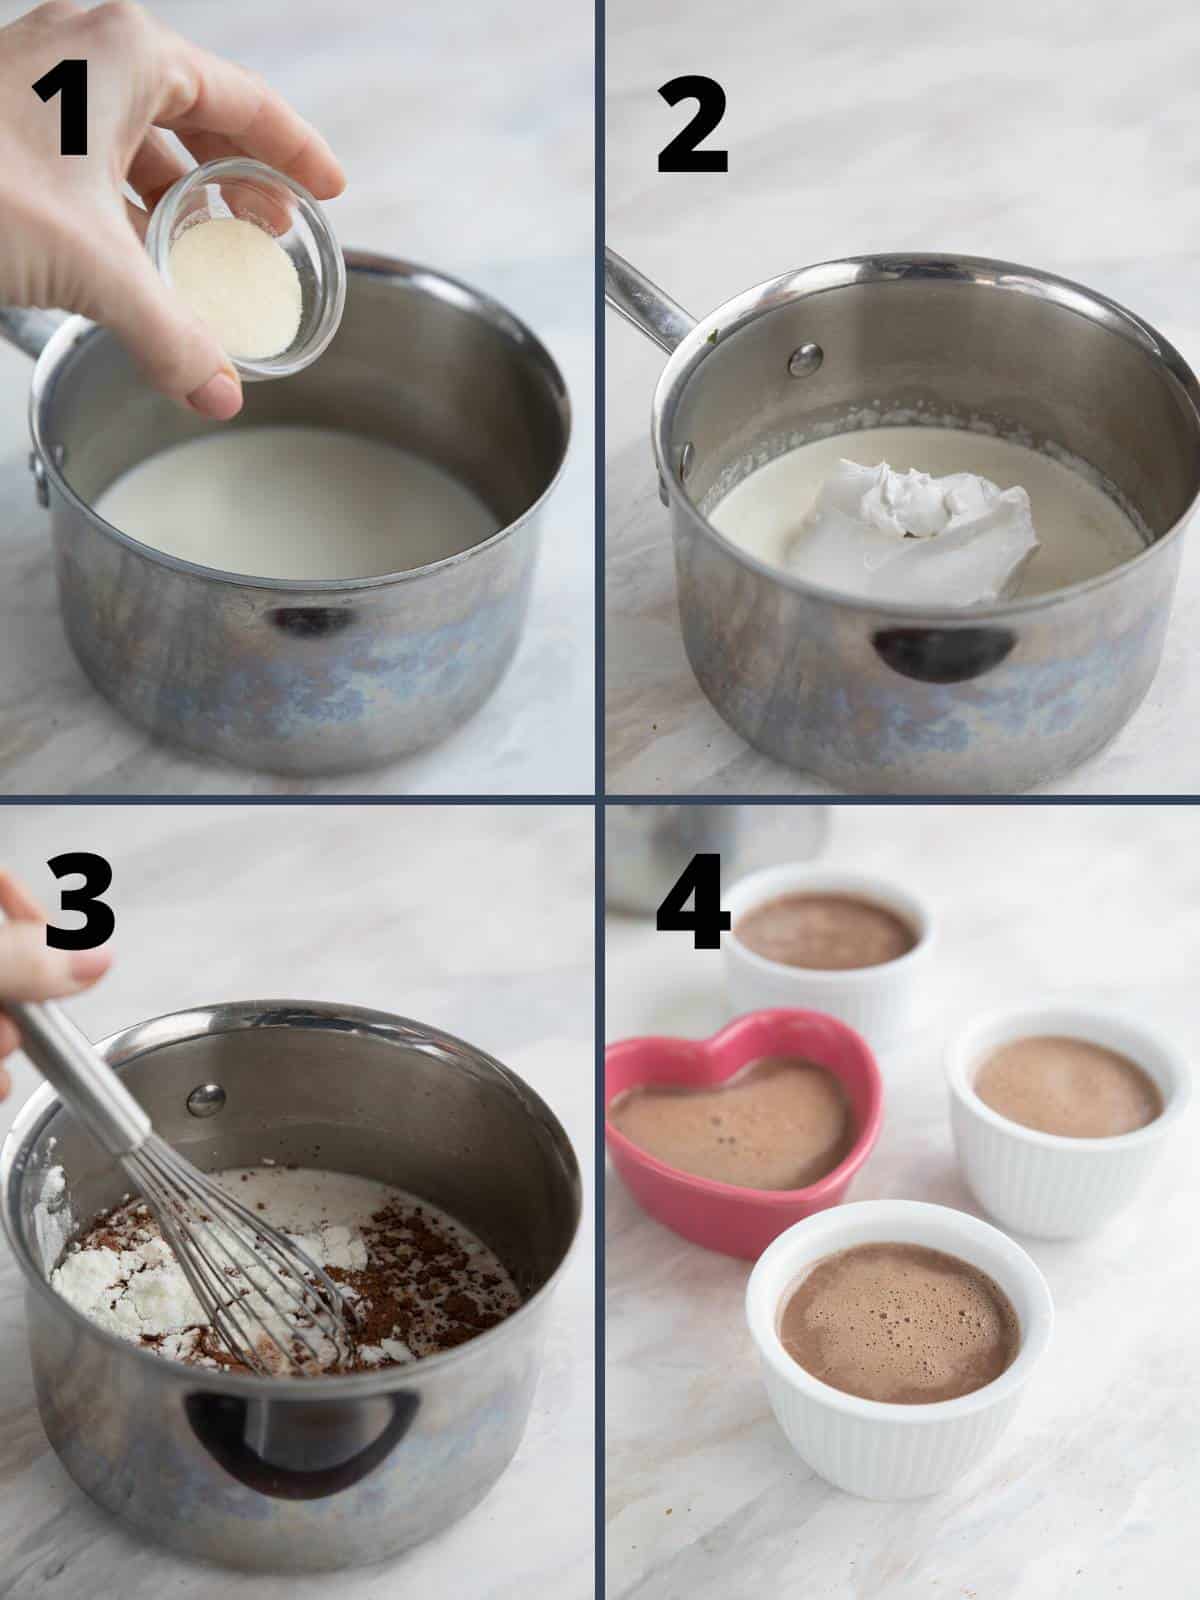 A collage of 4 images showing how to make chocolate panna cotta.